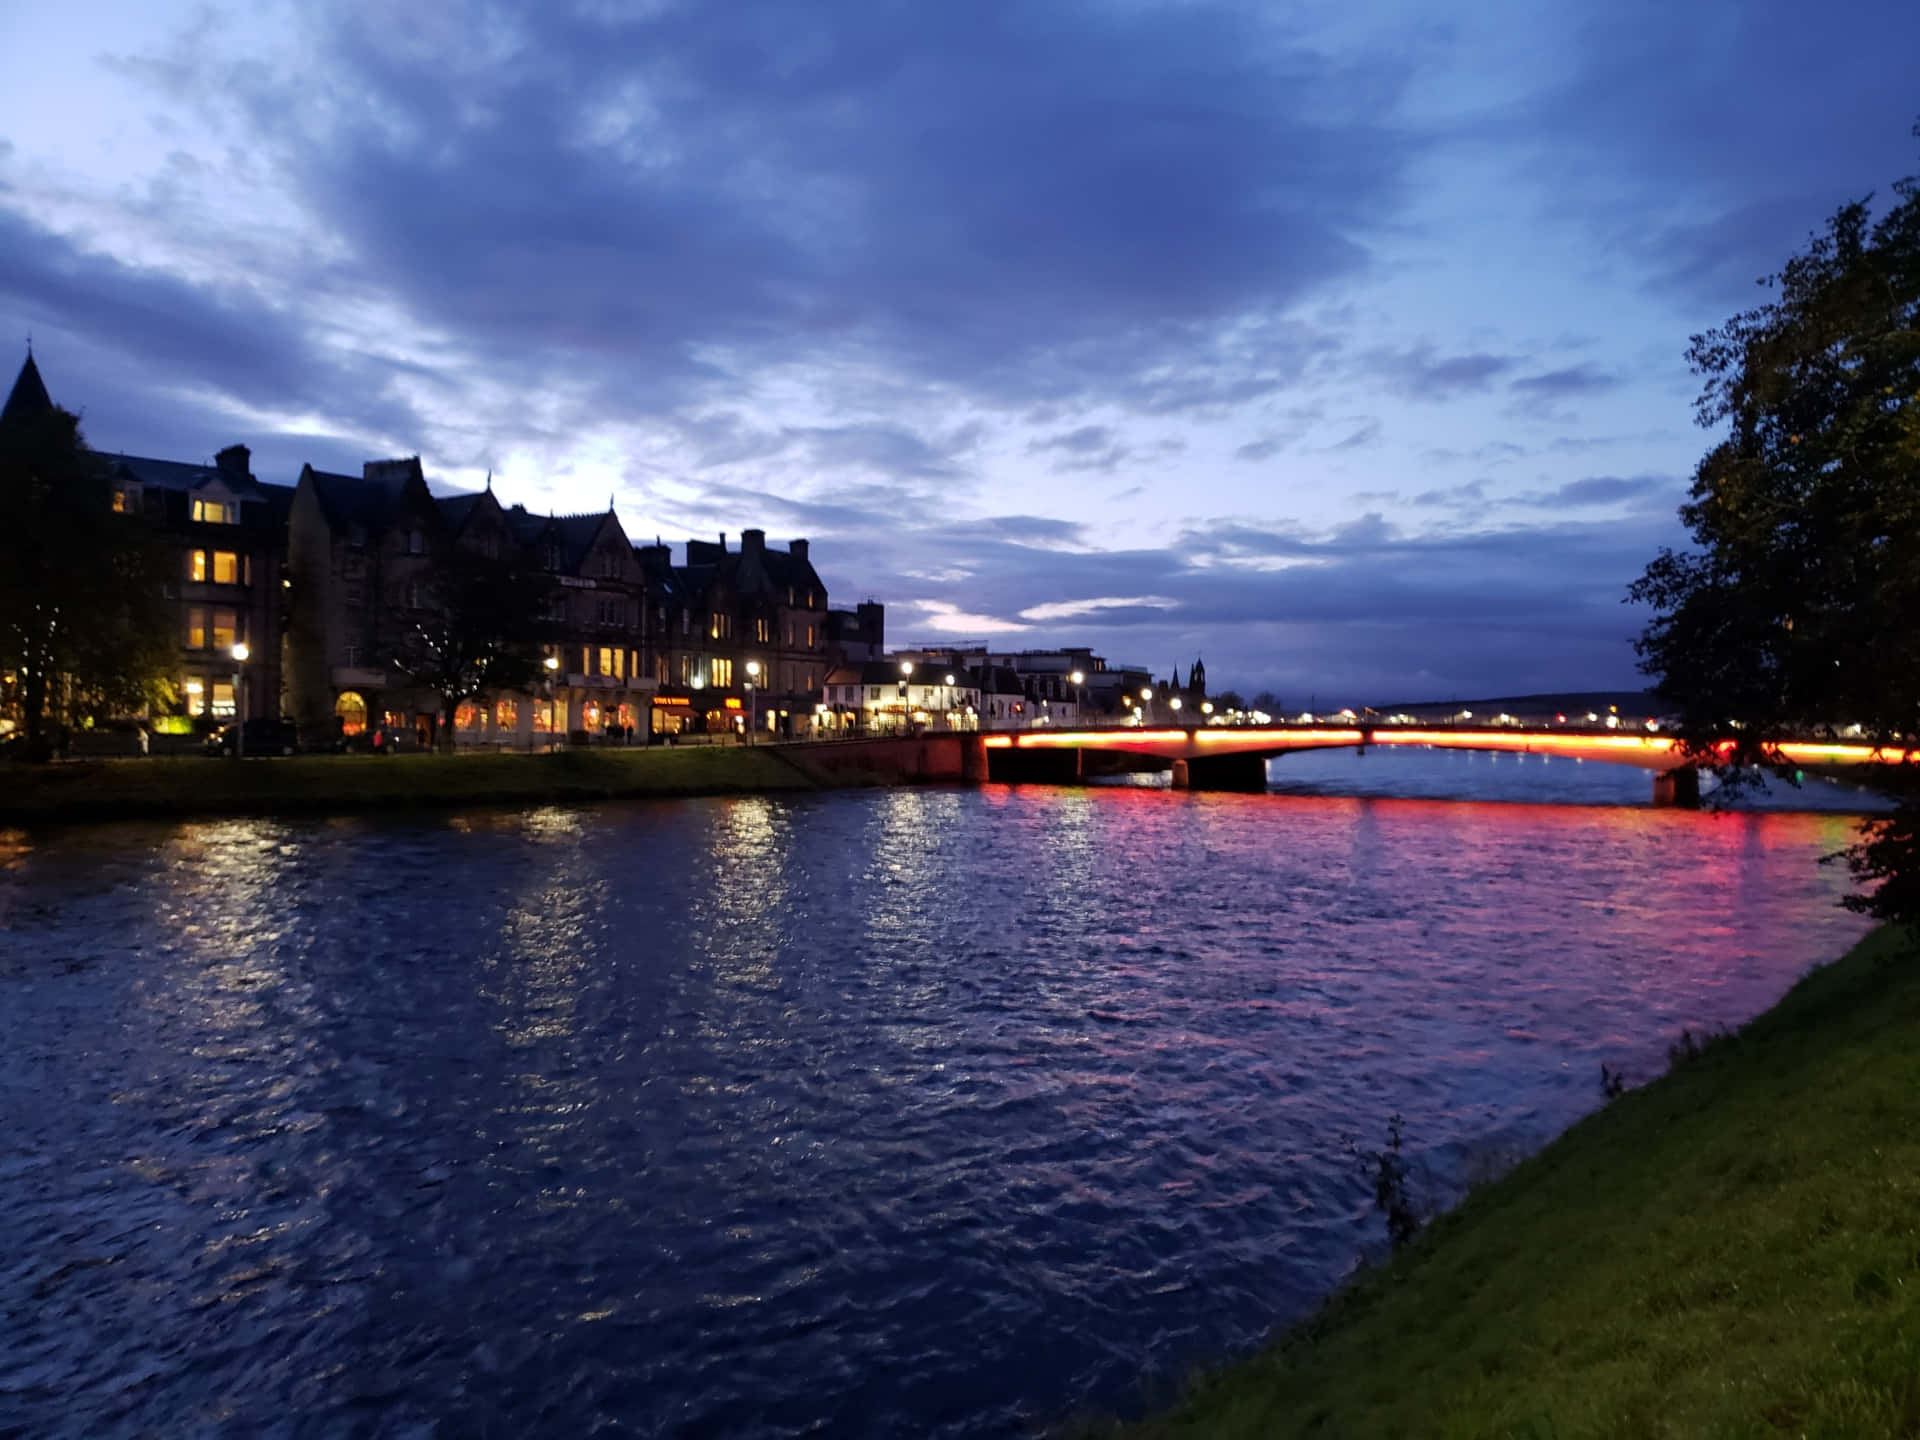 Enchanting Sunrise Over The Ness River In Inverness, Scotland Wallpaper